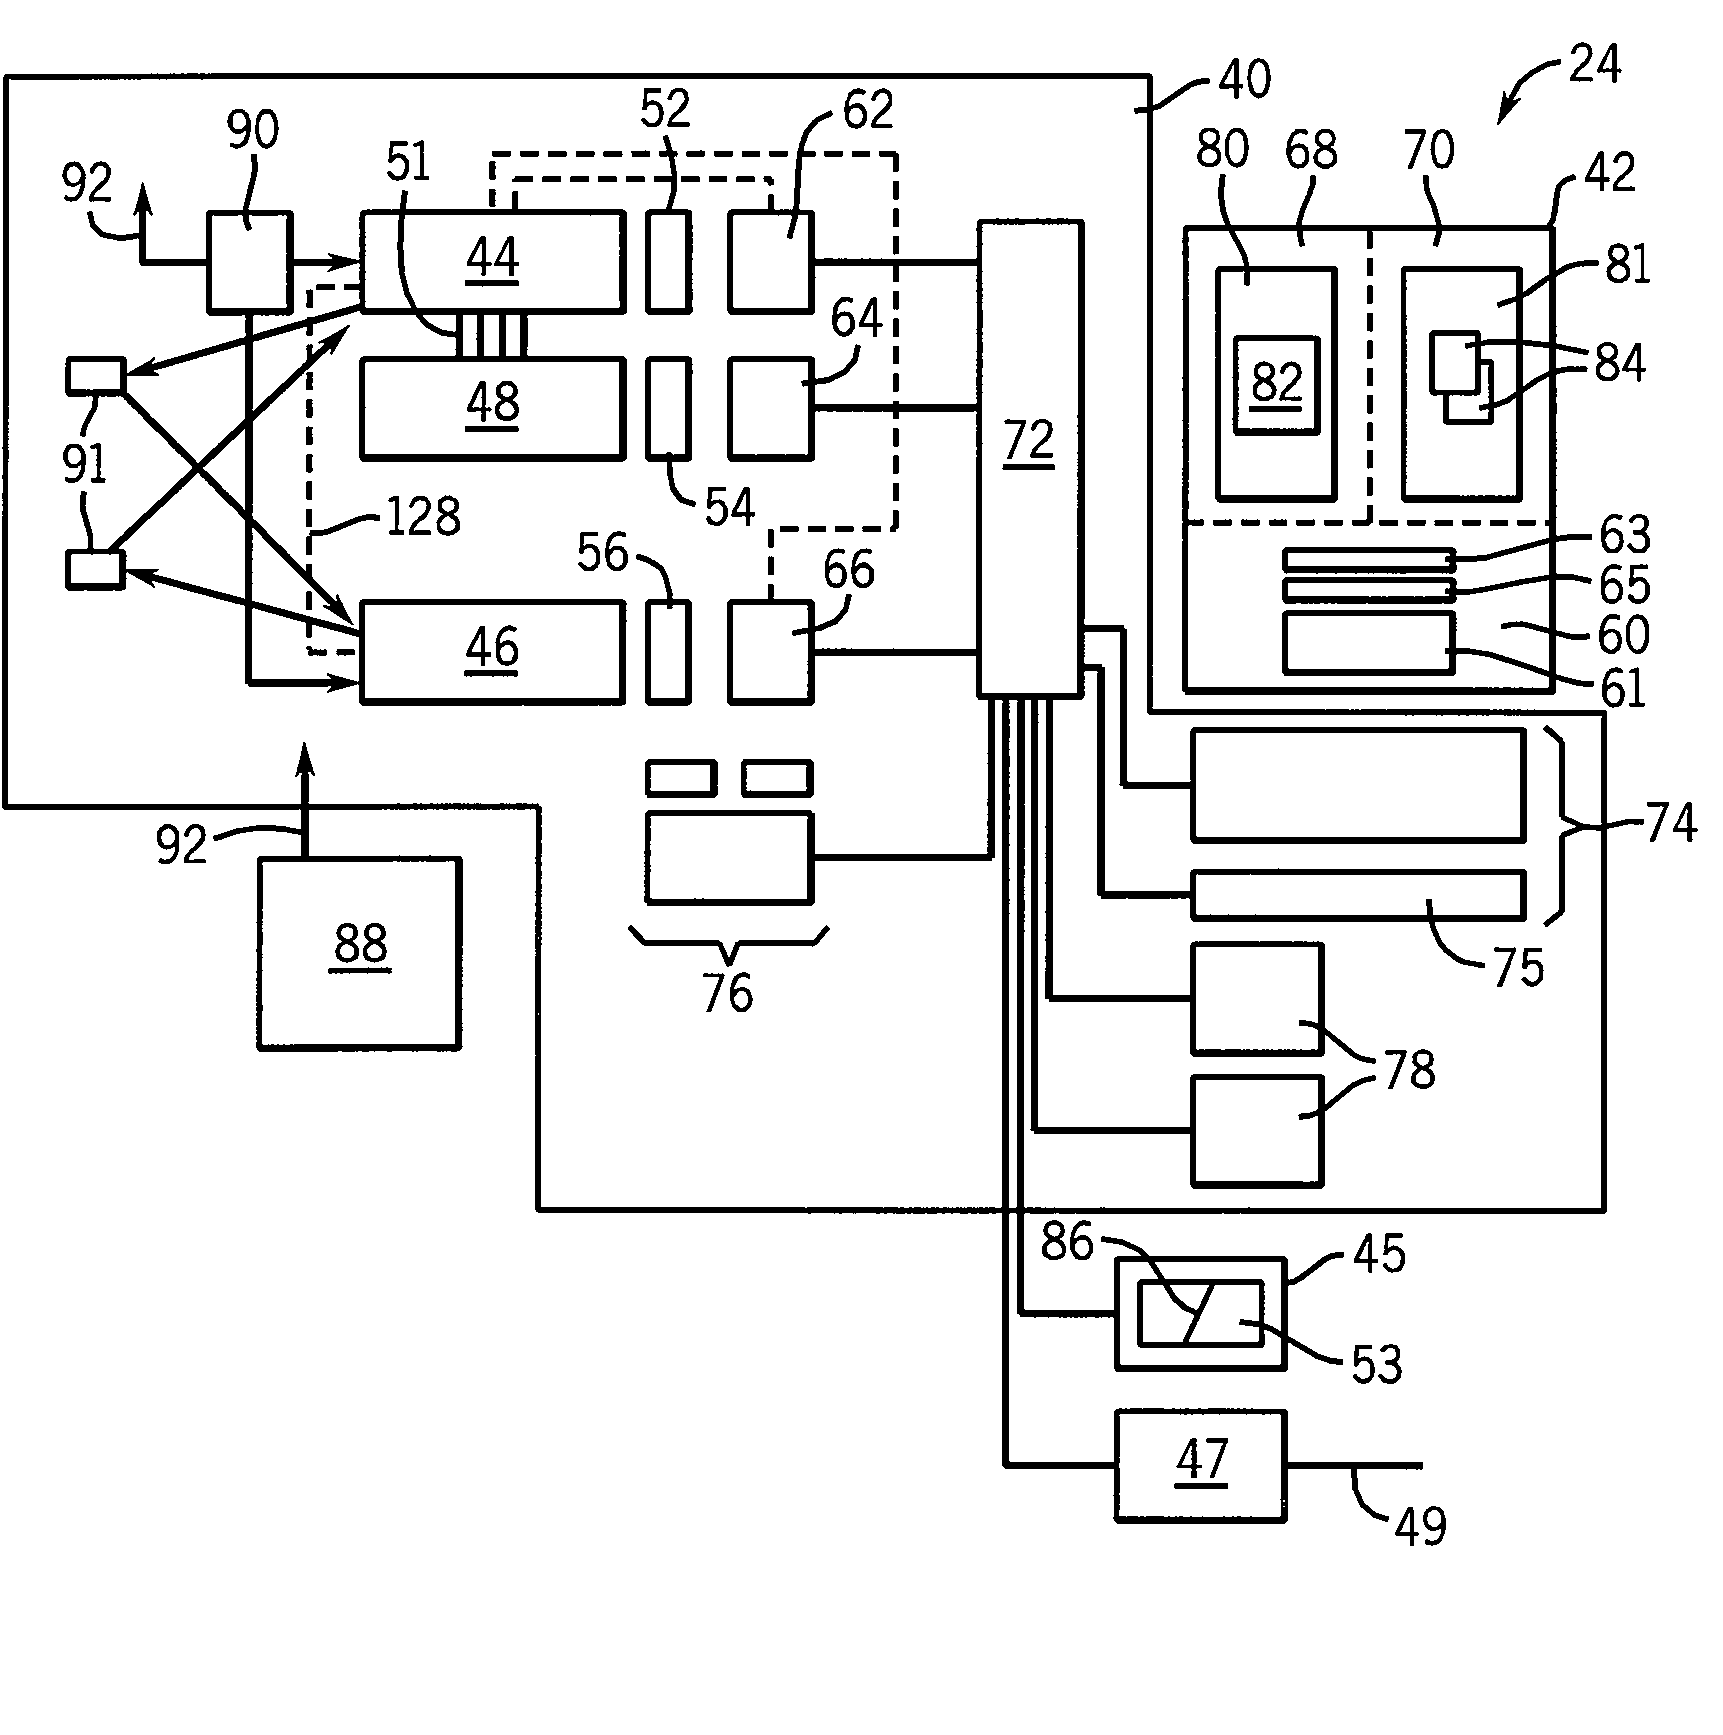 Industrial controller using shared memory multicore architecture